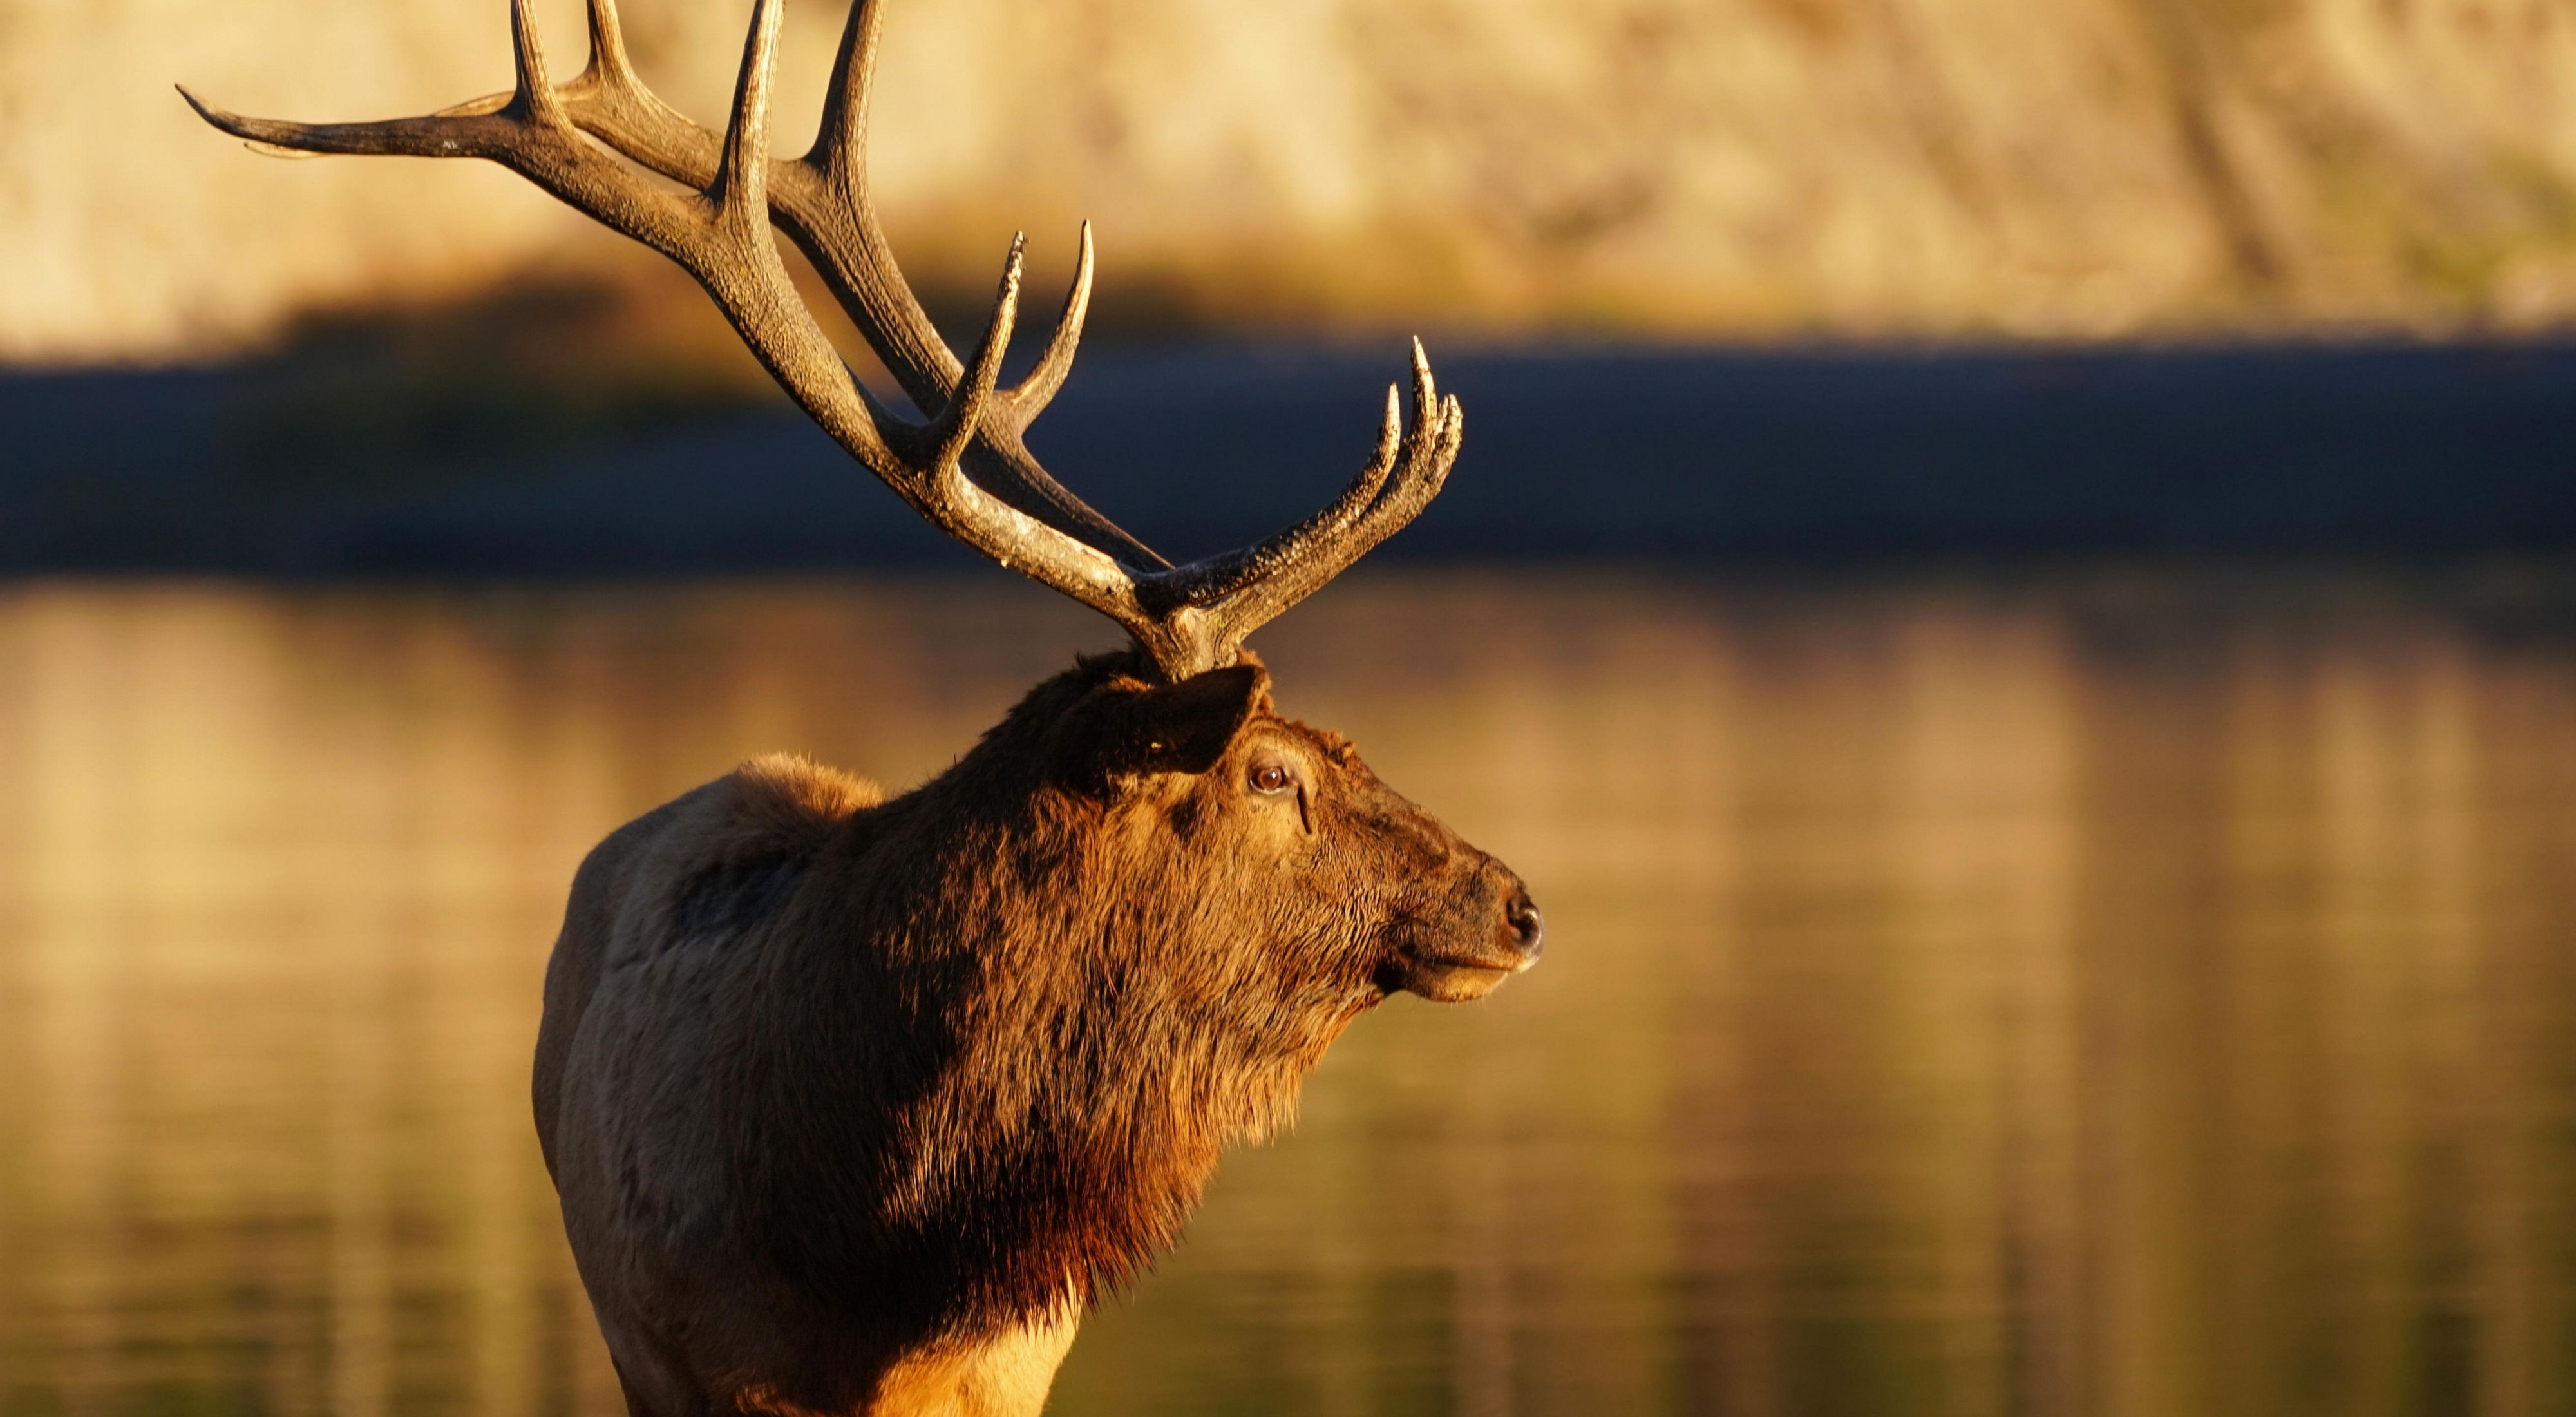 A bull elk at sunset in front of water in Yellowstone National Park.